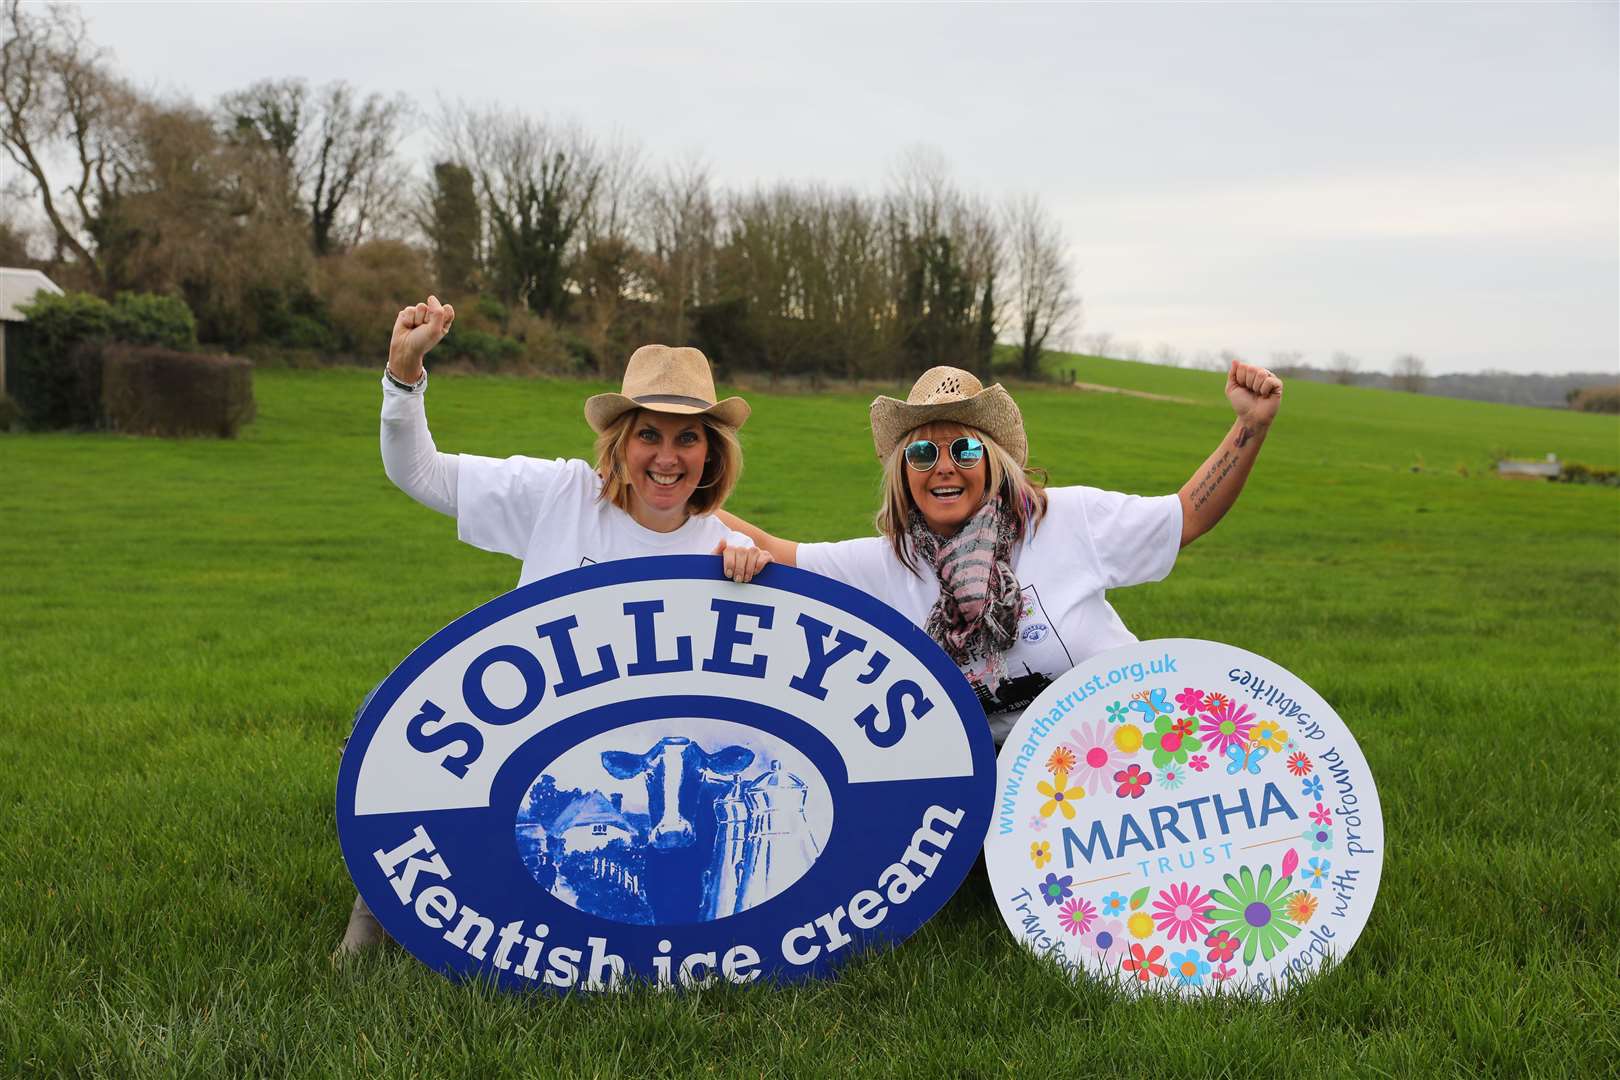 Katie Morrison from Solley's and Martha Trust's Kerry Banks. Picture: Andy Jones